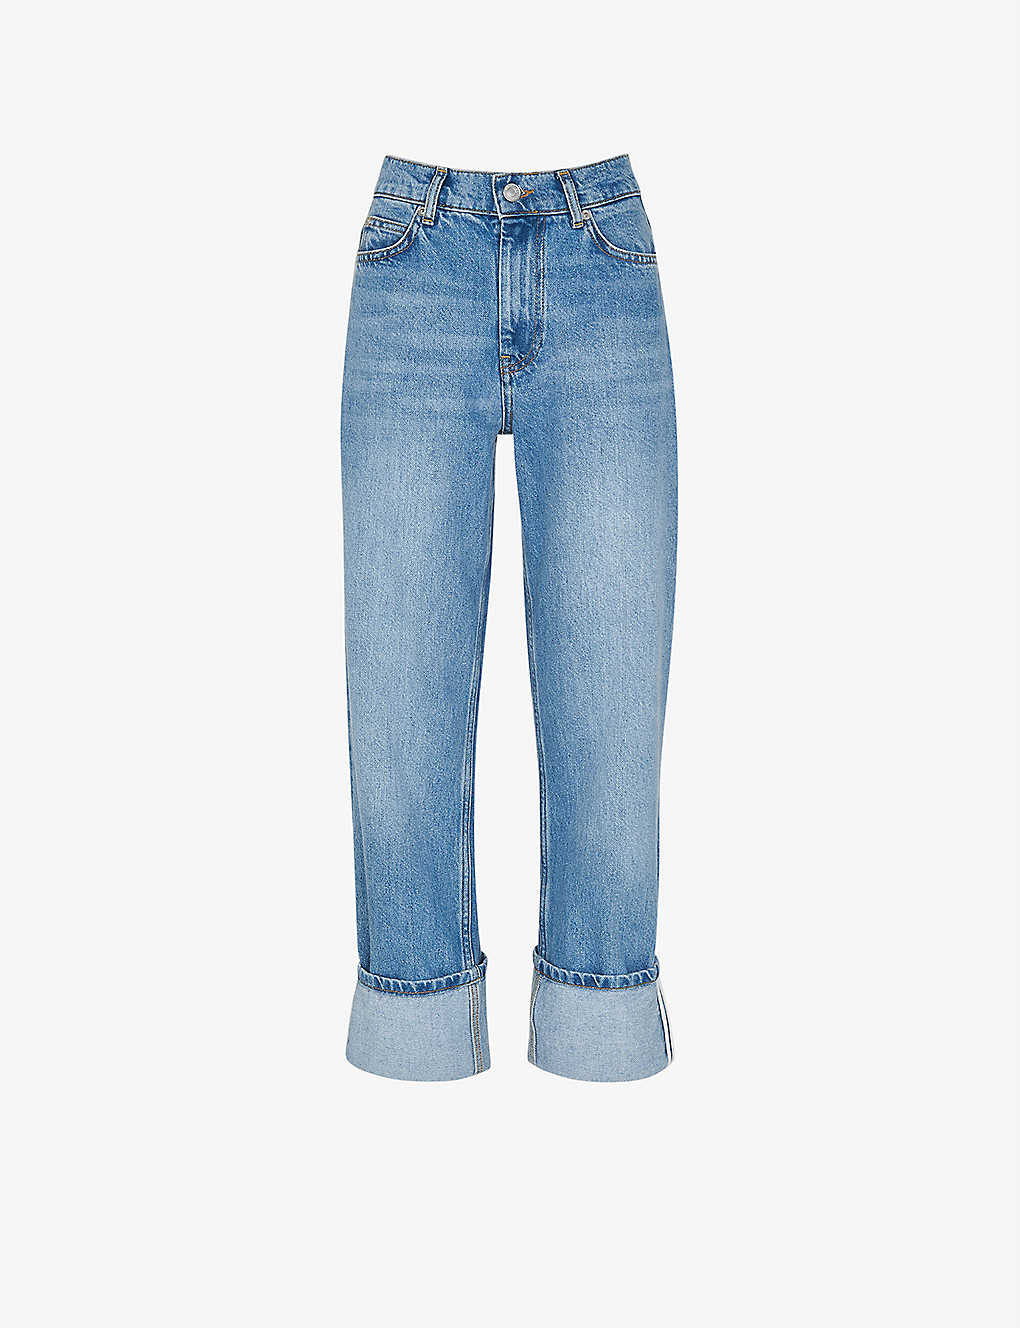 Whistles Authentic Alba Turn Up Jeans In Denim In Blue